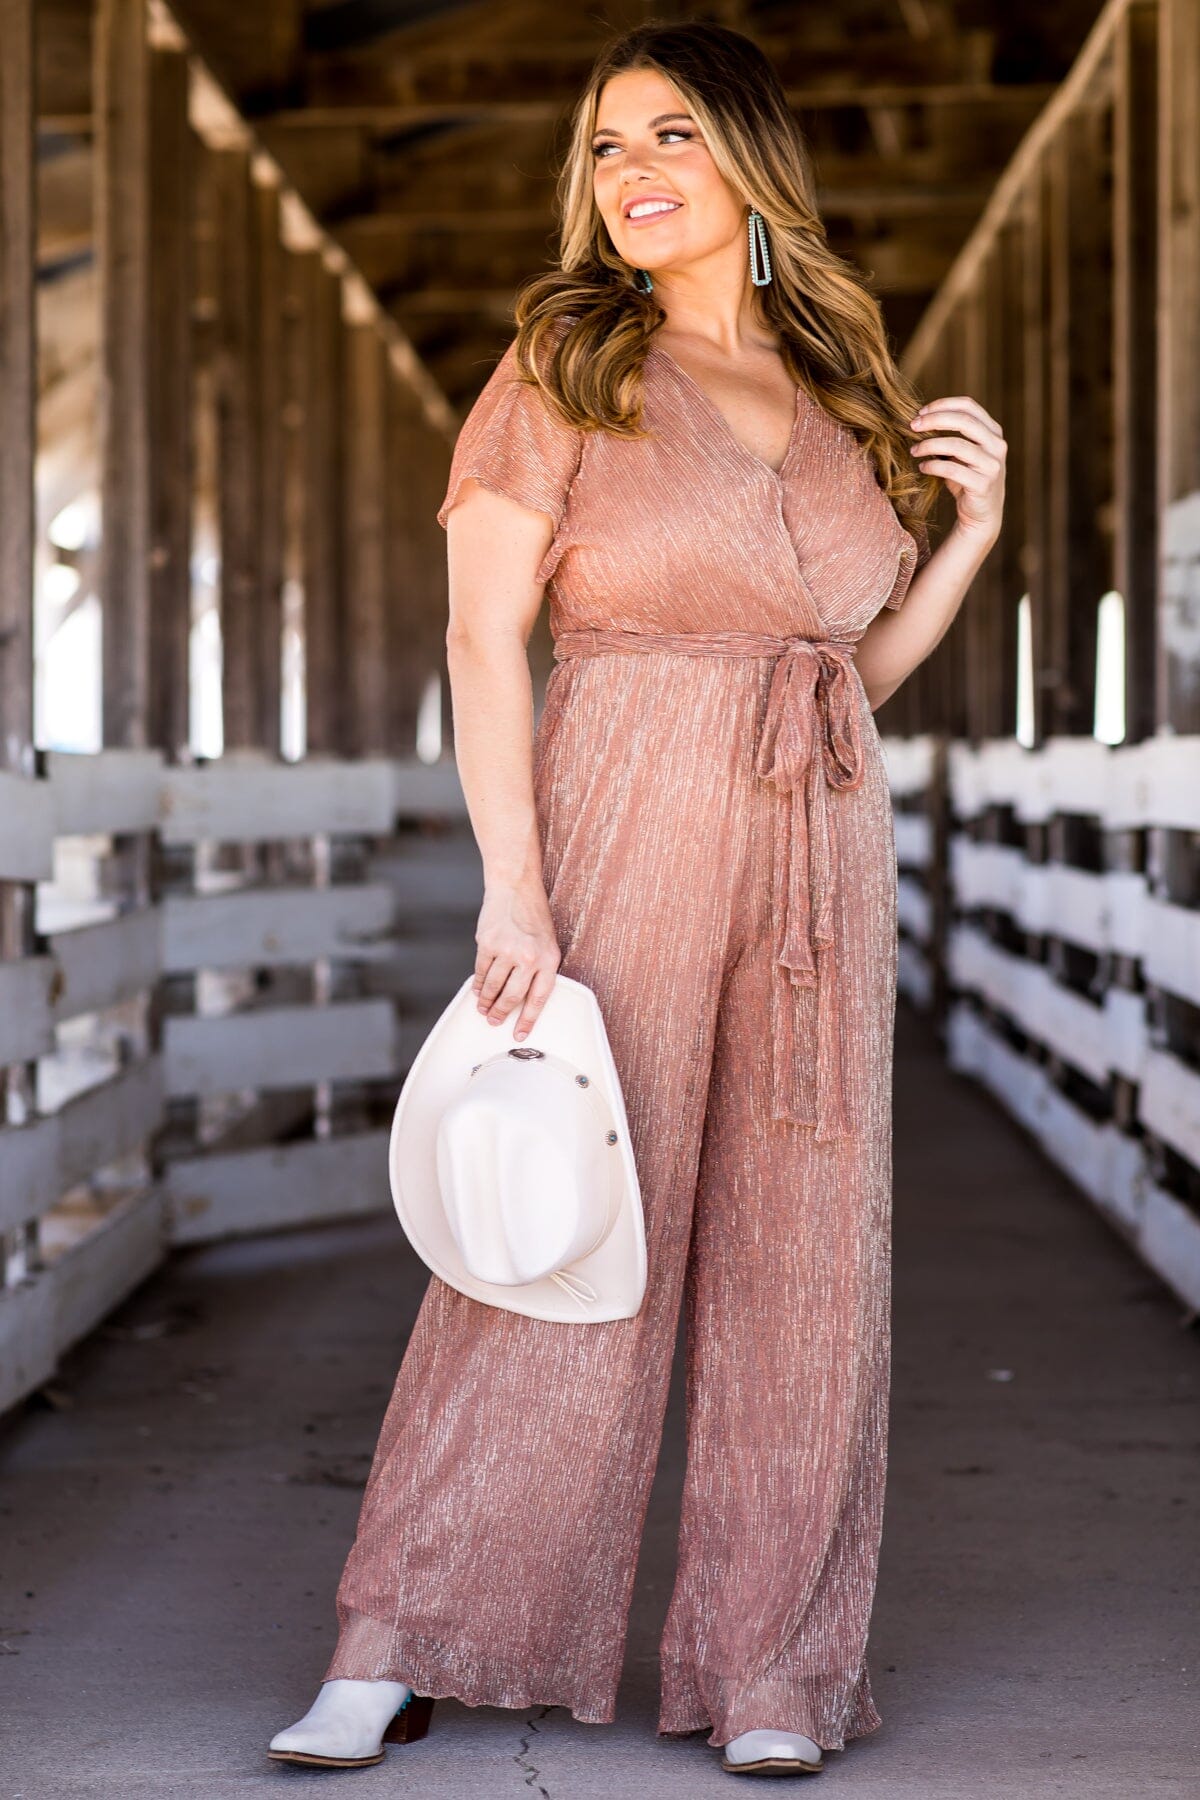 Dusty Rose Metallic Surplice Front Jumpsuit - Filly Flair